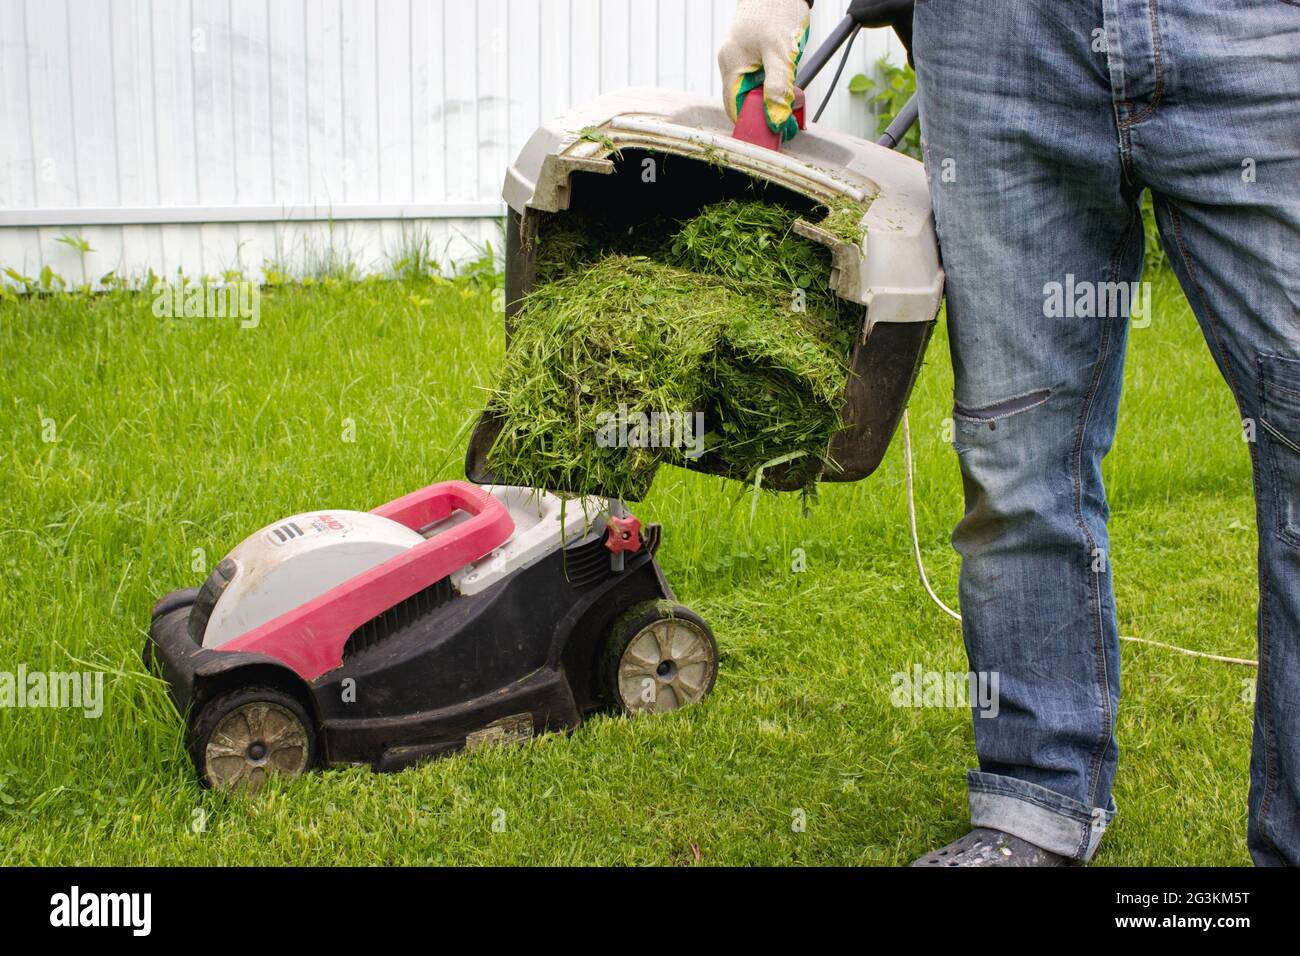 Man with Lawn mower In Garden. Man with lawn mower grass collector in hand. Gardener trimming a garden. Stock Photo